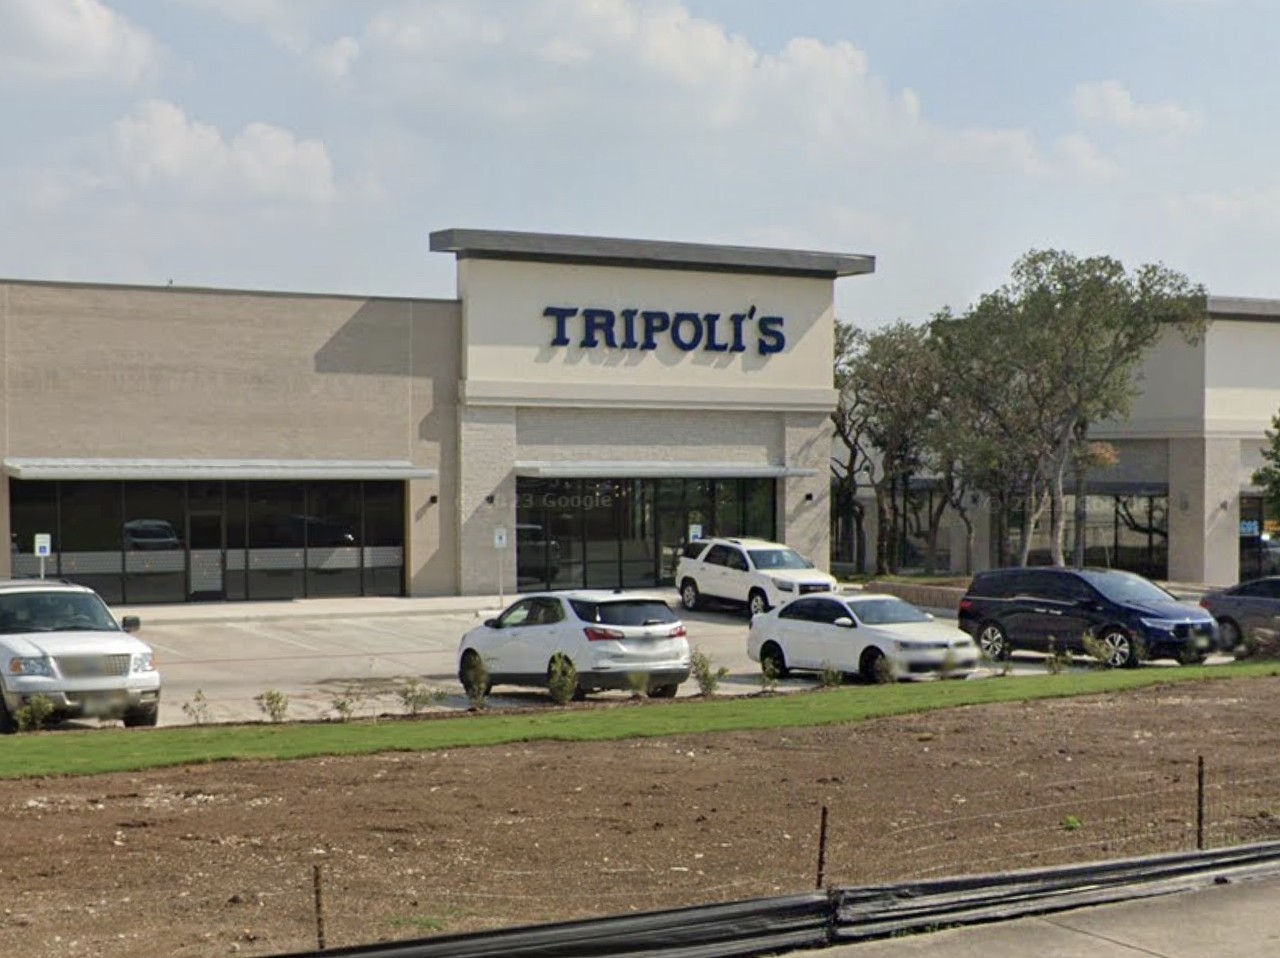 Tripoli's
322 Valley Hi Drive
This February, Tripoli’s closed its location on the north side in preparation for its relocation to 1726 Alamo Ranch on the far West Side. The Alamo Ranch location has not opened yet, but will be similar to the previous location with an added patio.